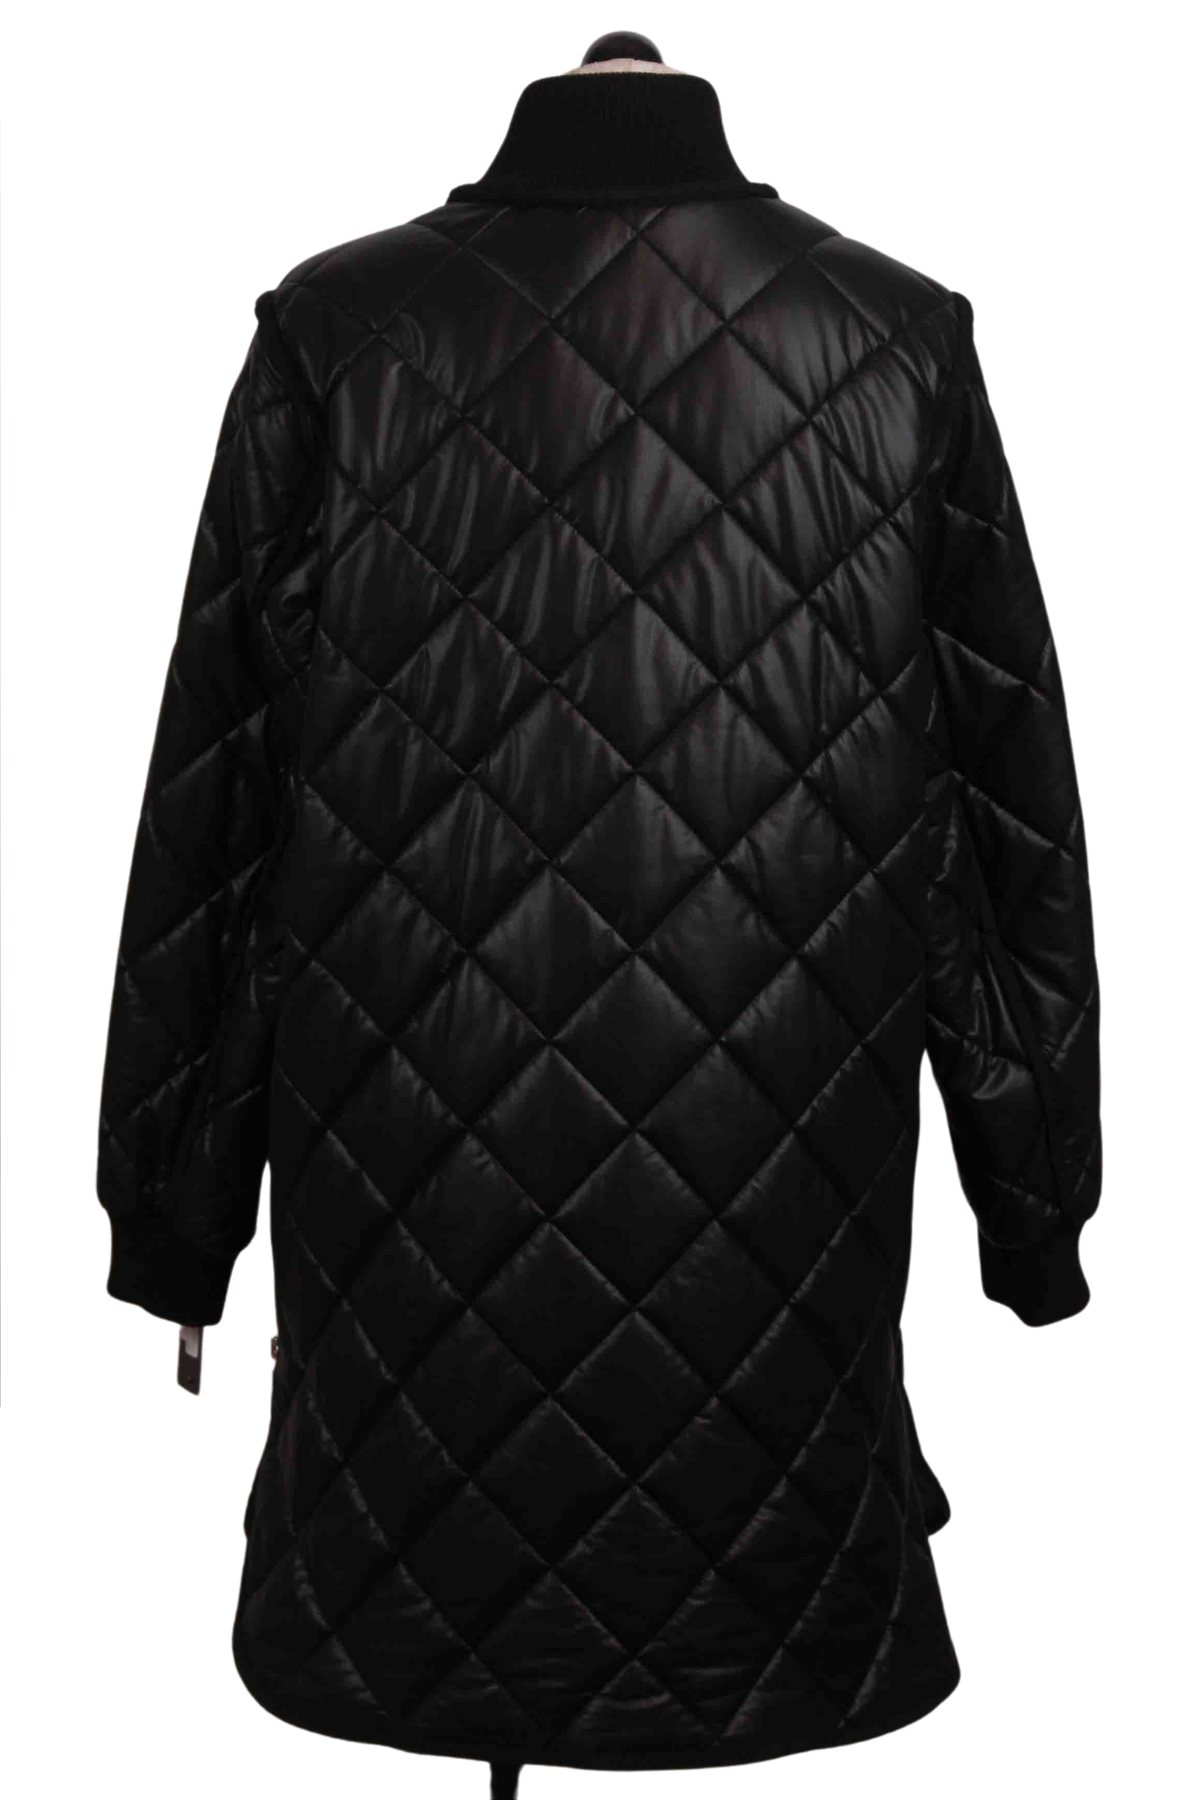 back view of Quilted Vegan Leather Jacket by Nikki Jones